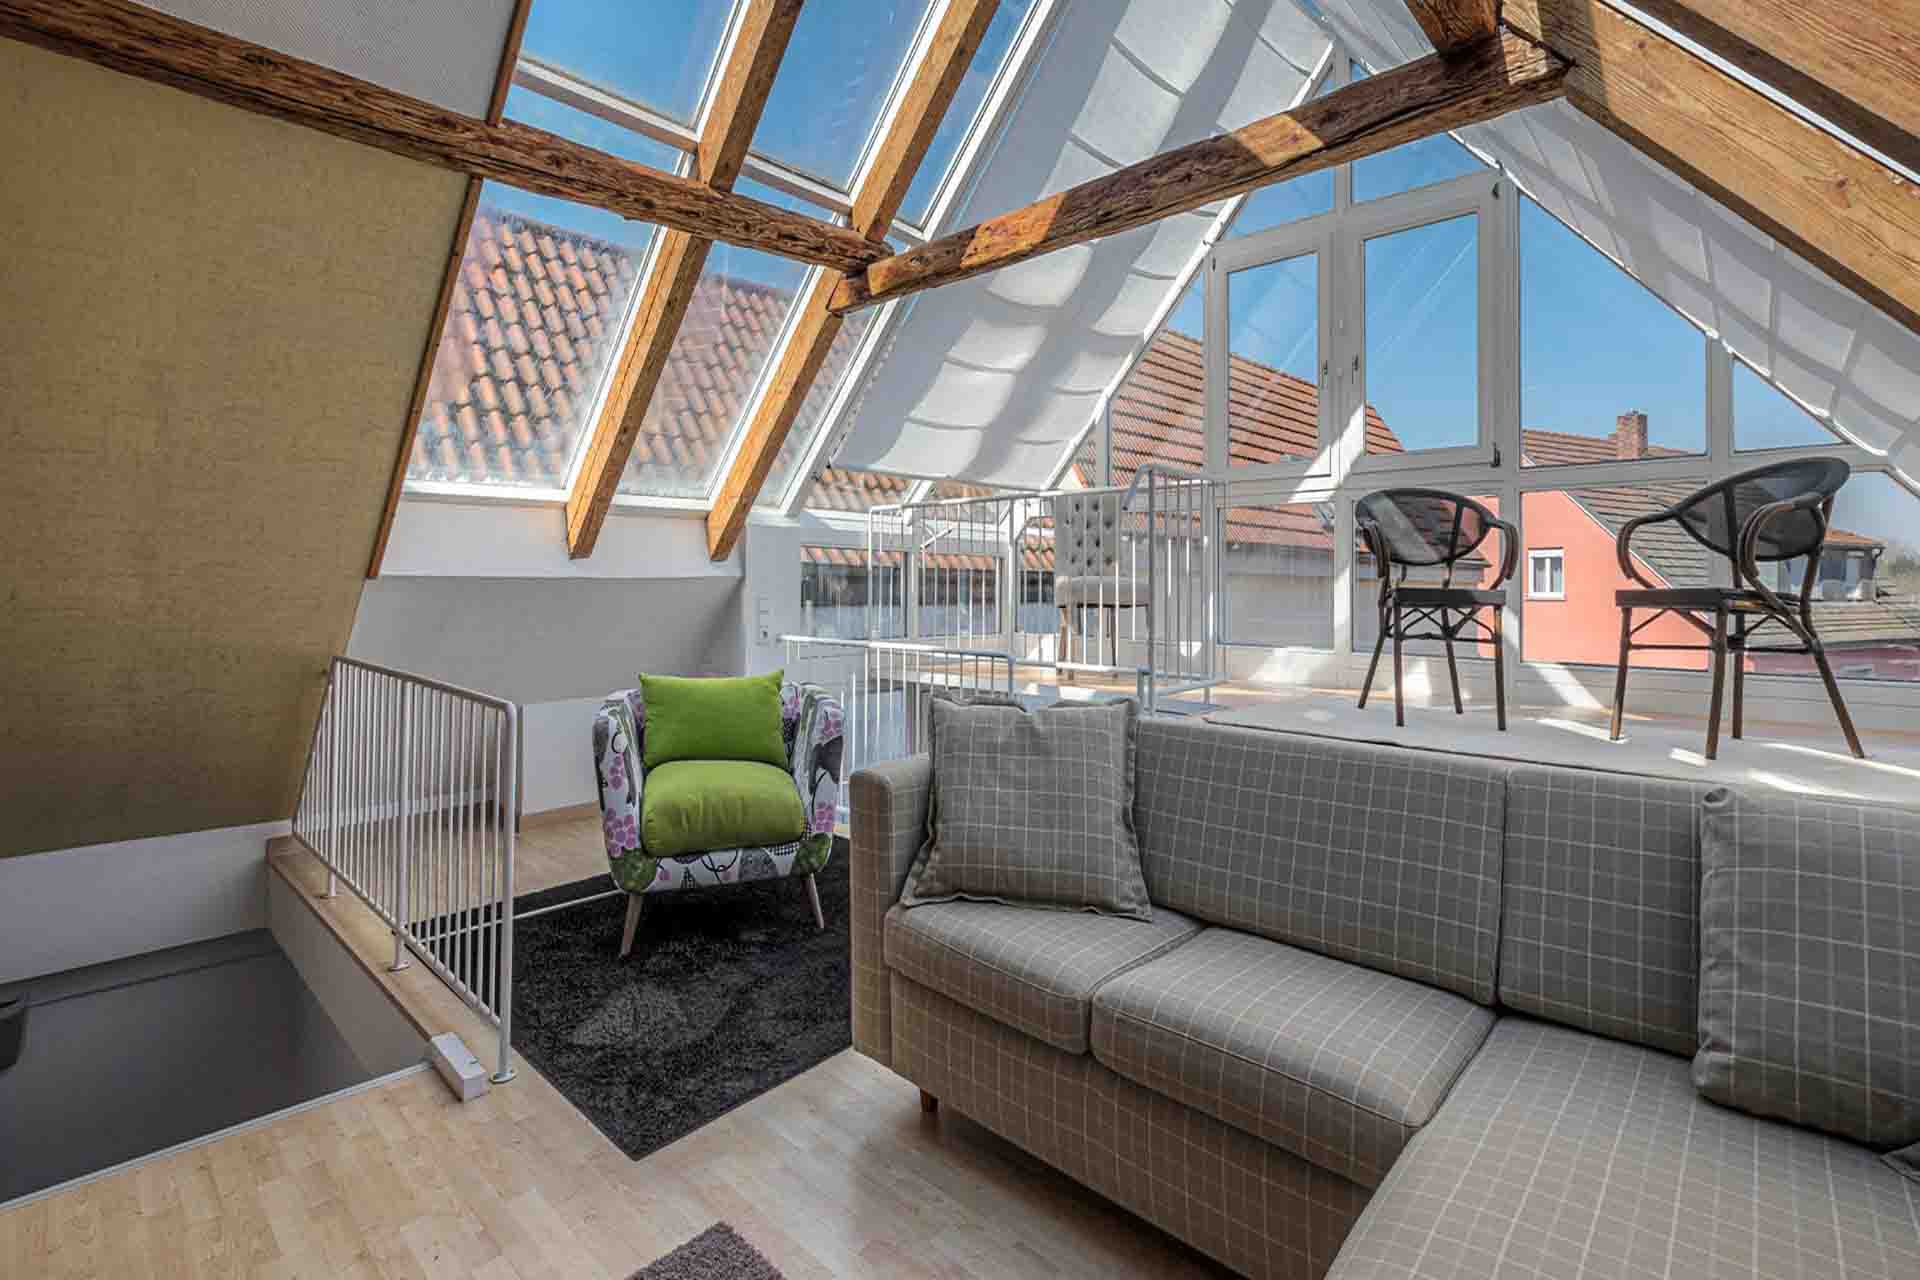 Loft Conversion Cost In 2022 Checkatrade, How Much Does It Cost To Convert A Loft Into Bedroom Uk